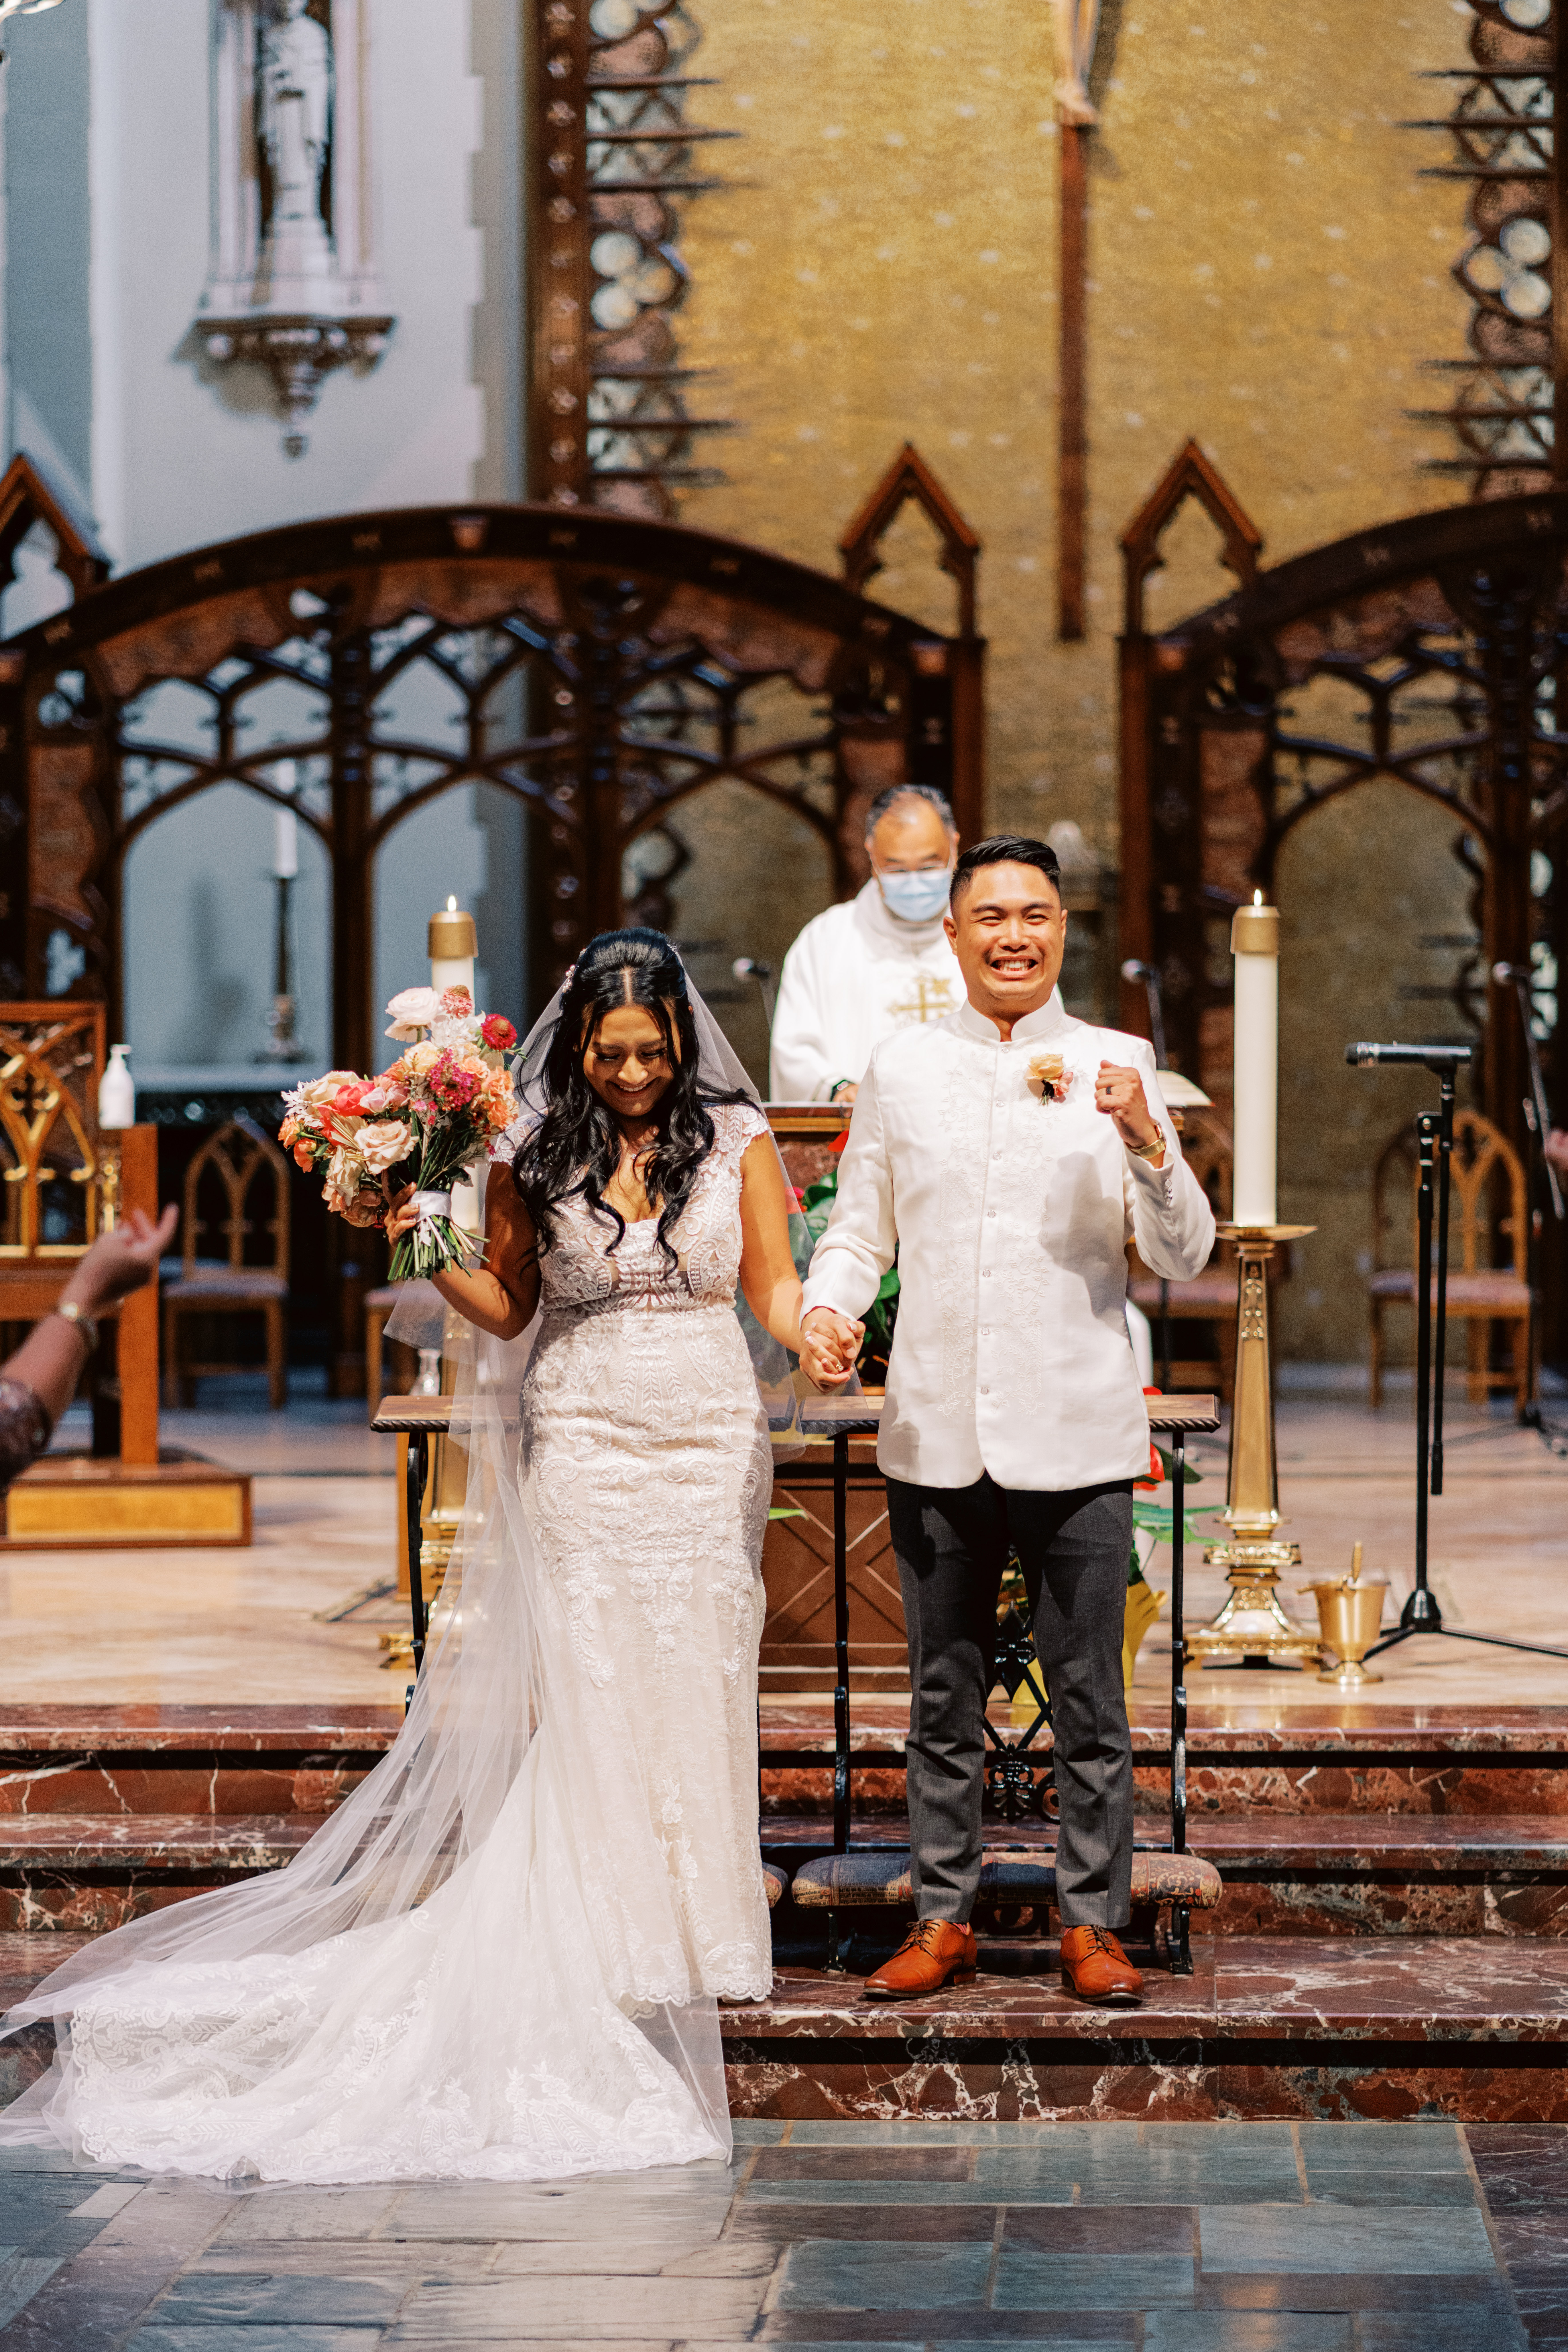 bride and groom recessional down altar at Catholic Church wedding ceremony